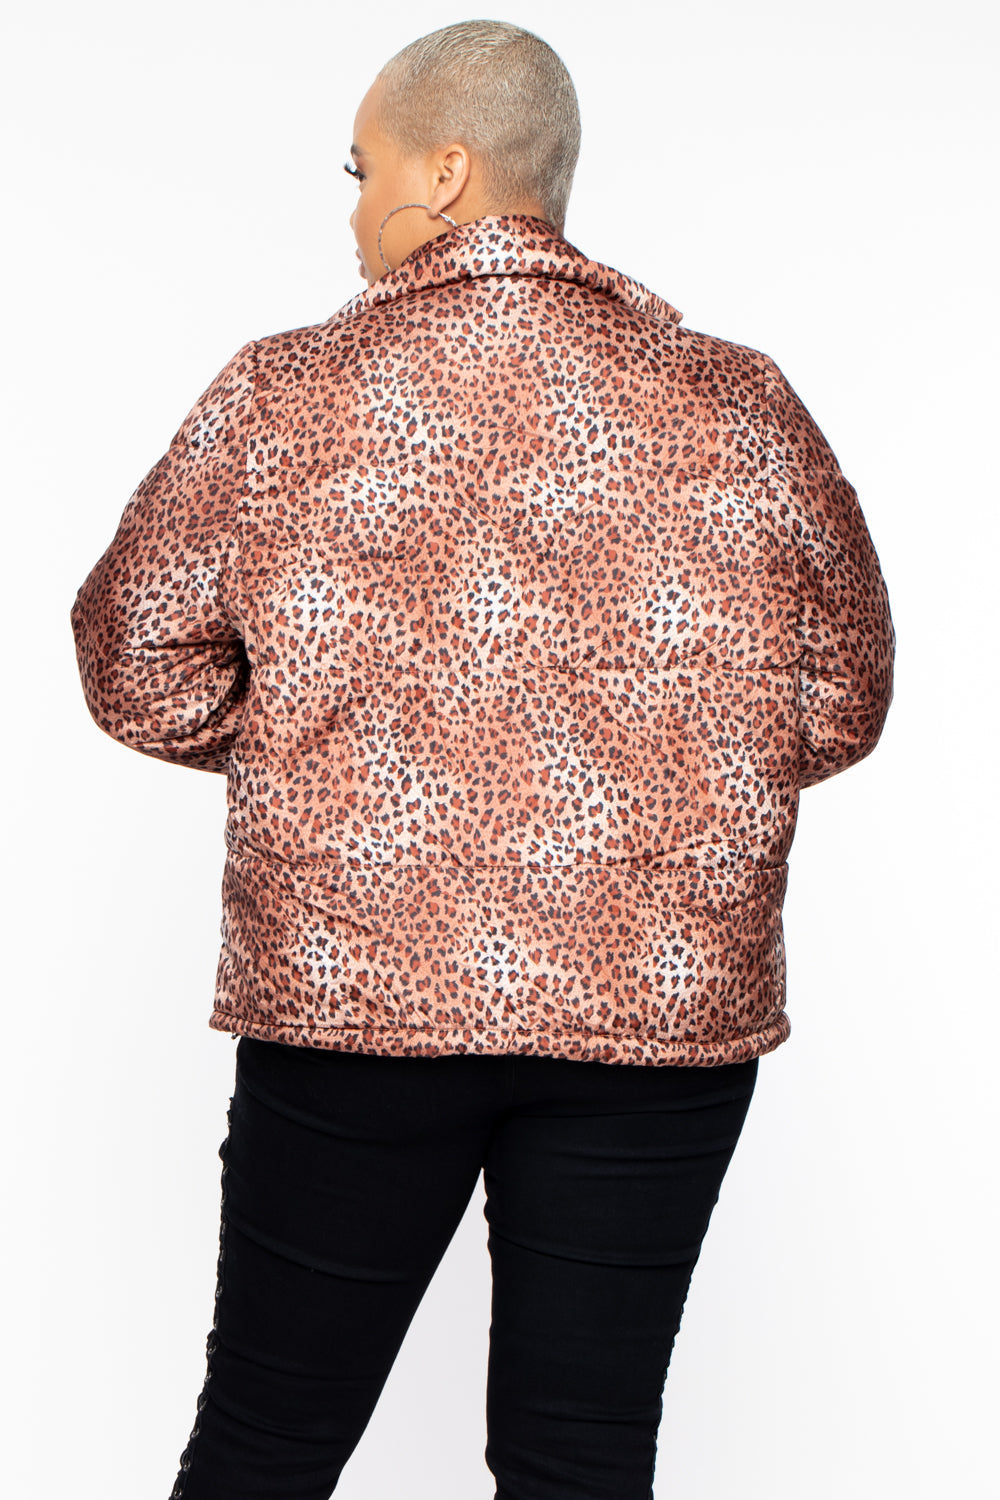 Jou Jou Jackets And Outerwear Plus Size Leopard Print Puffer Coat - Brown